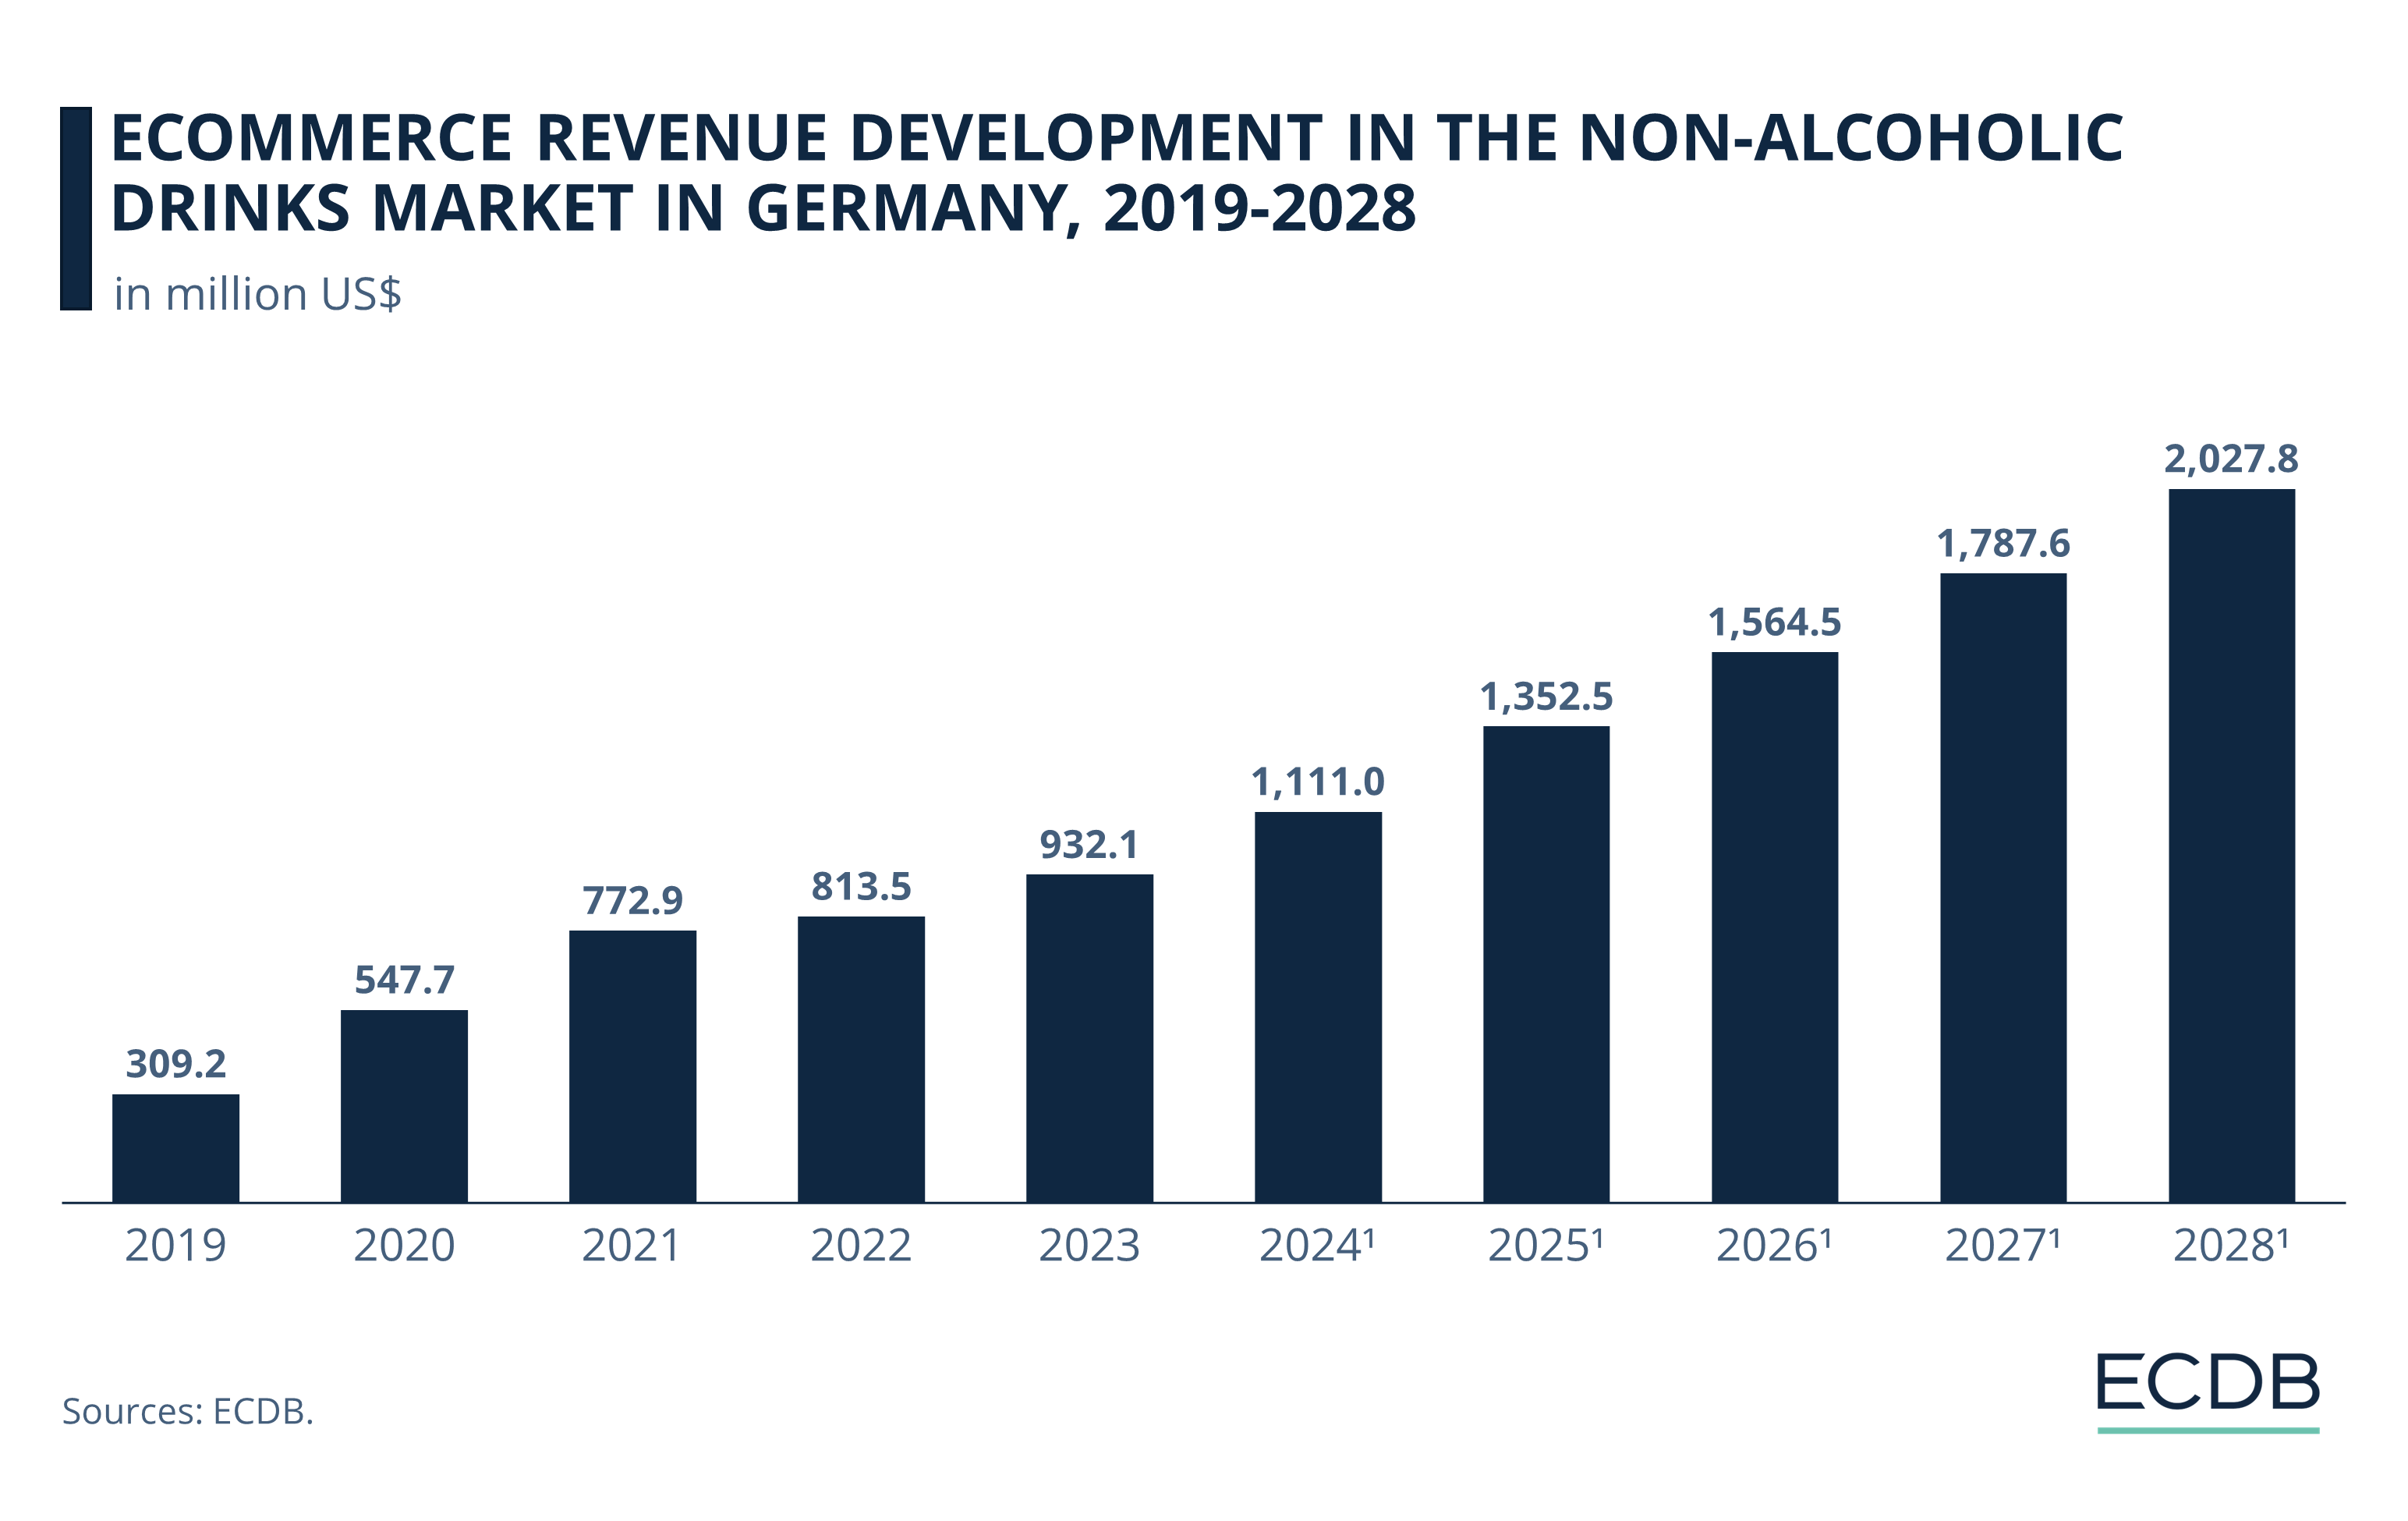 Non alcoholic drinks market in Germany